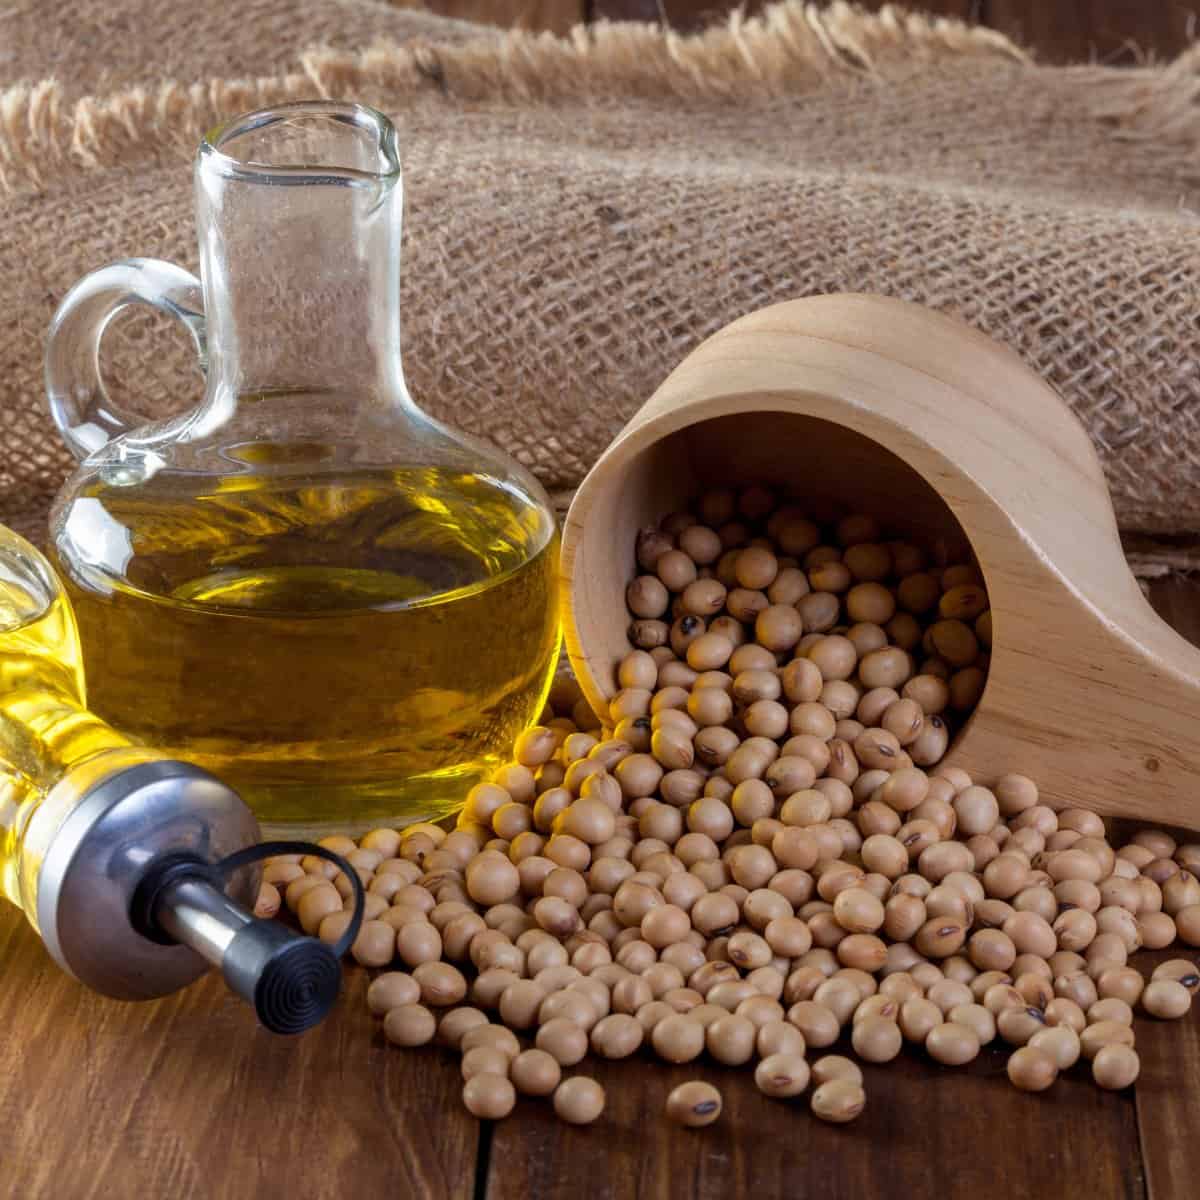 What is soybean oil